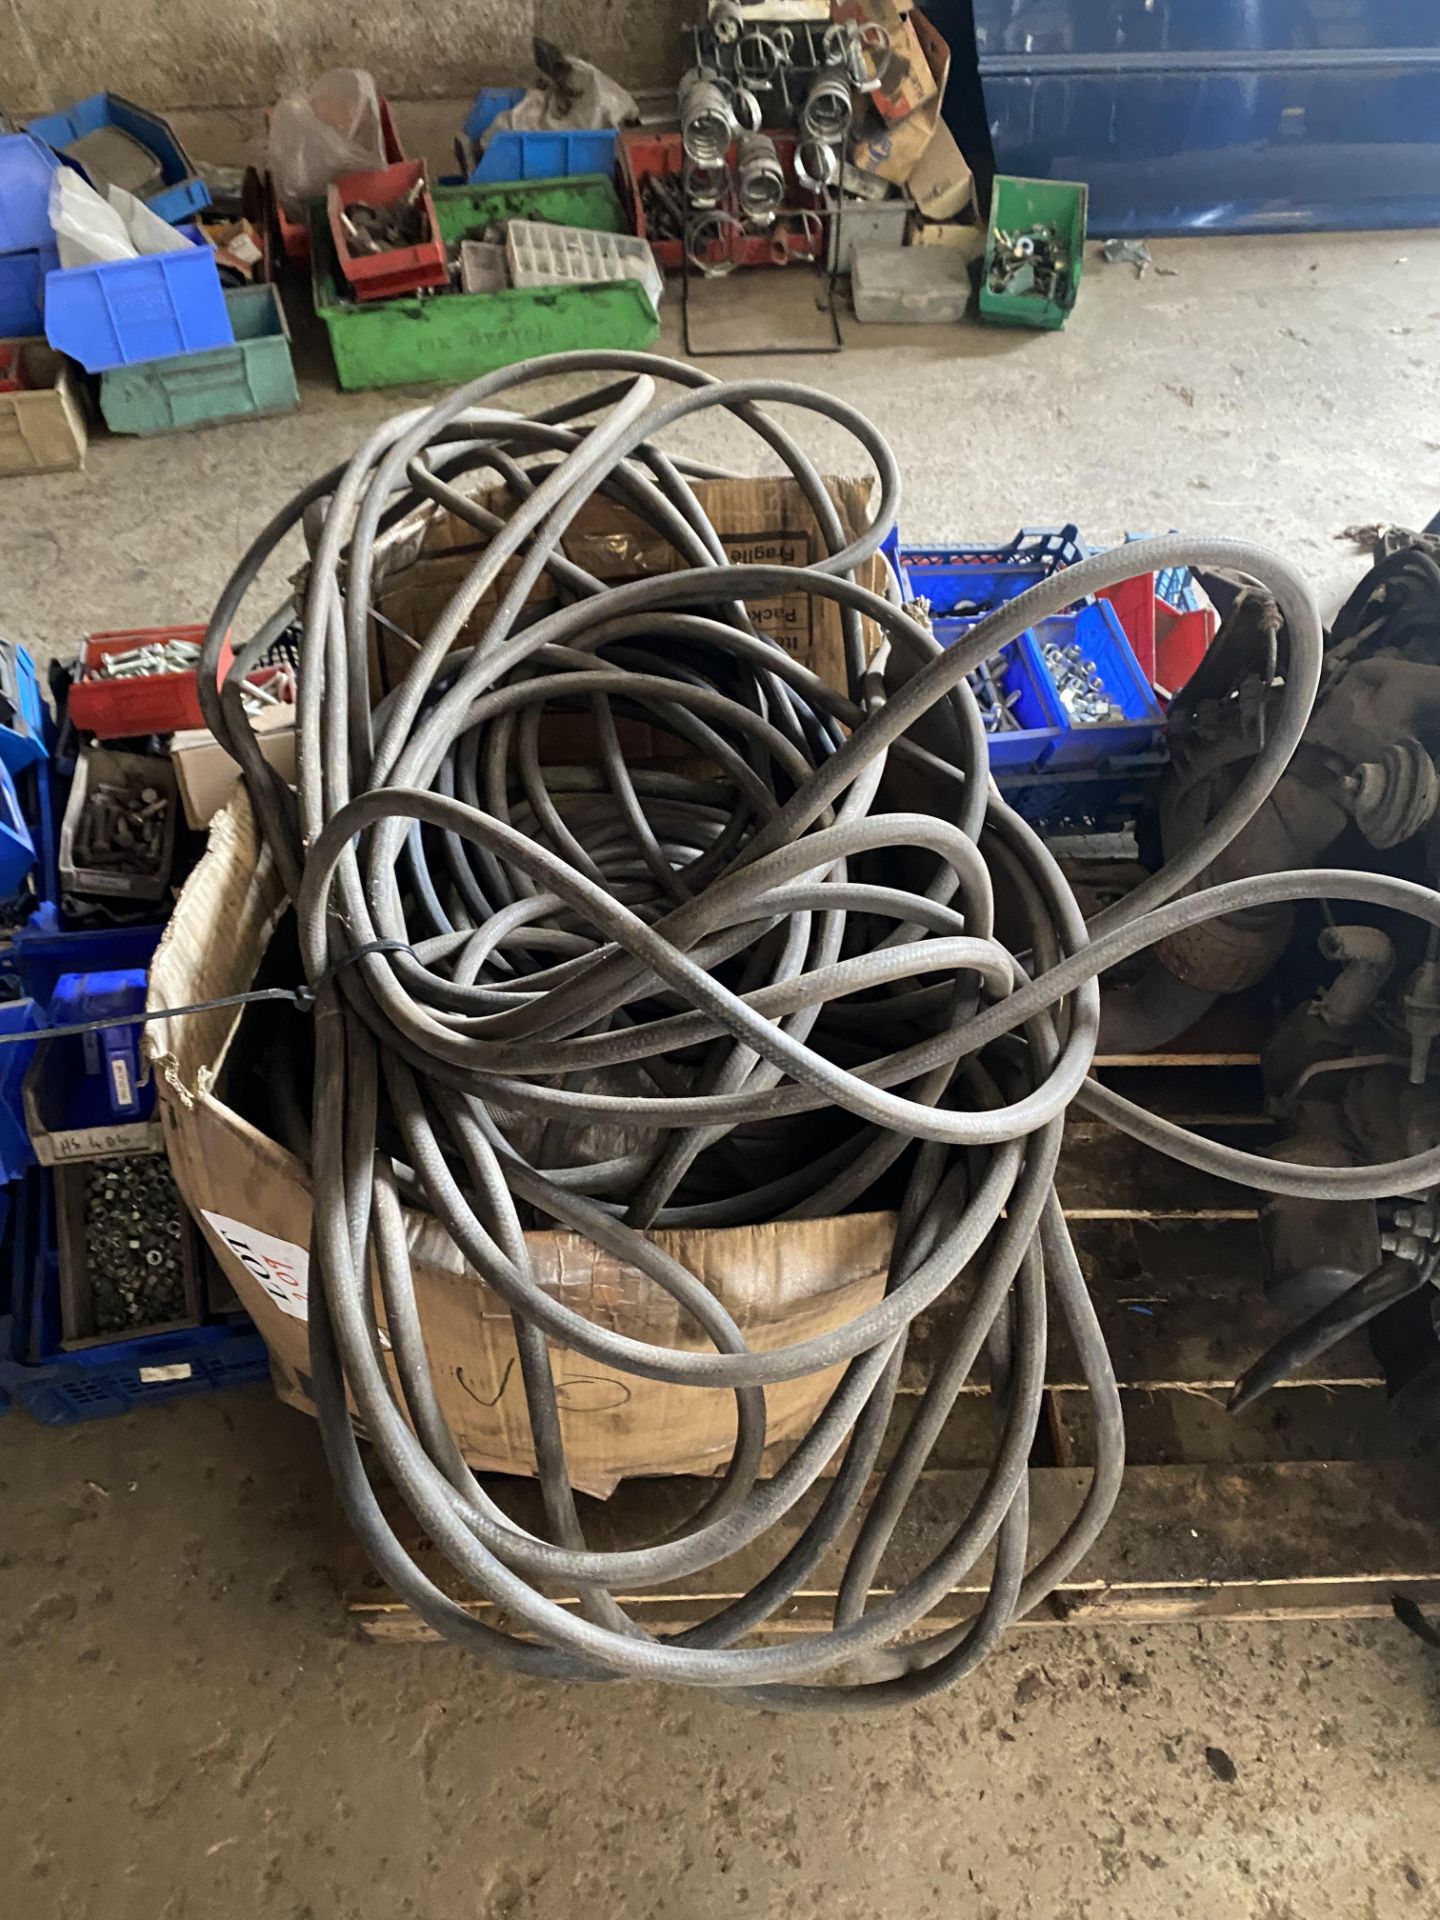 Assorted box of rubber hoses